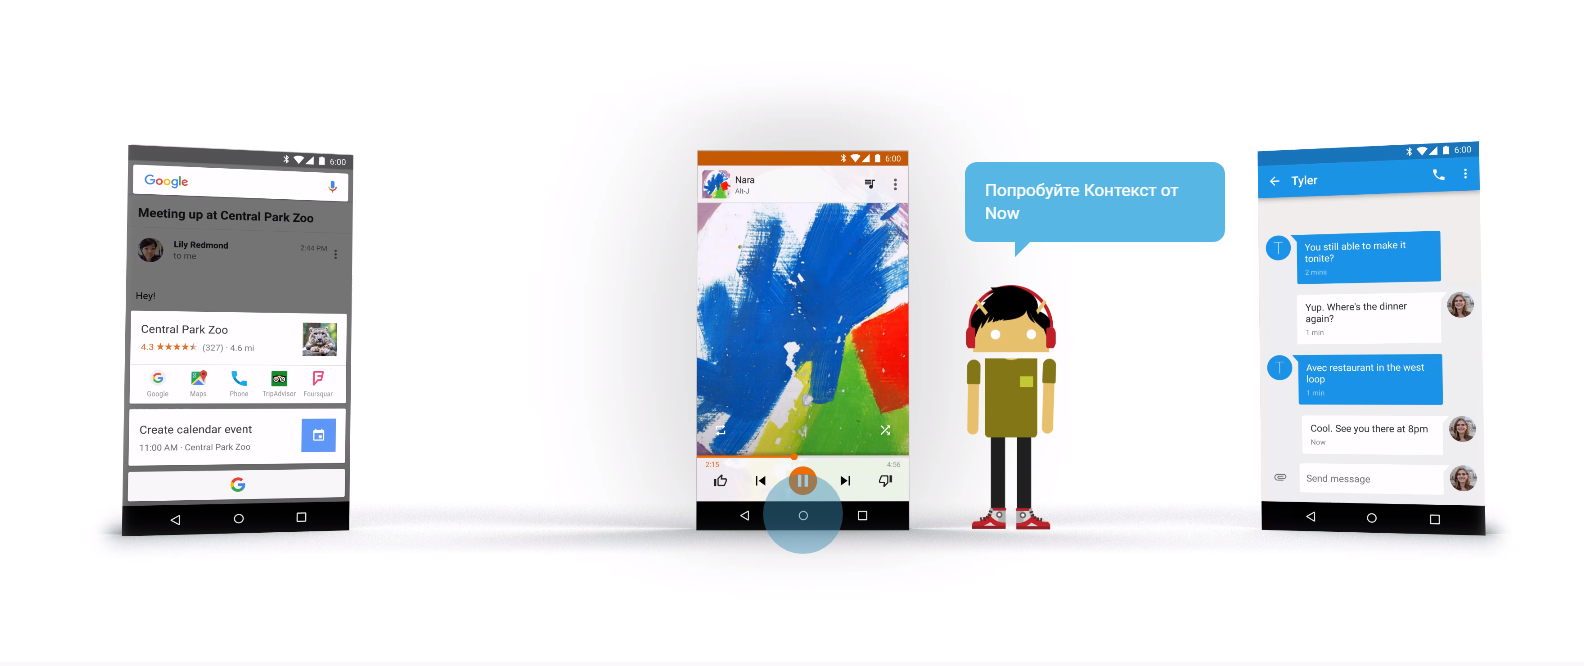 Как выглядит Android Marshmallow